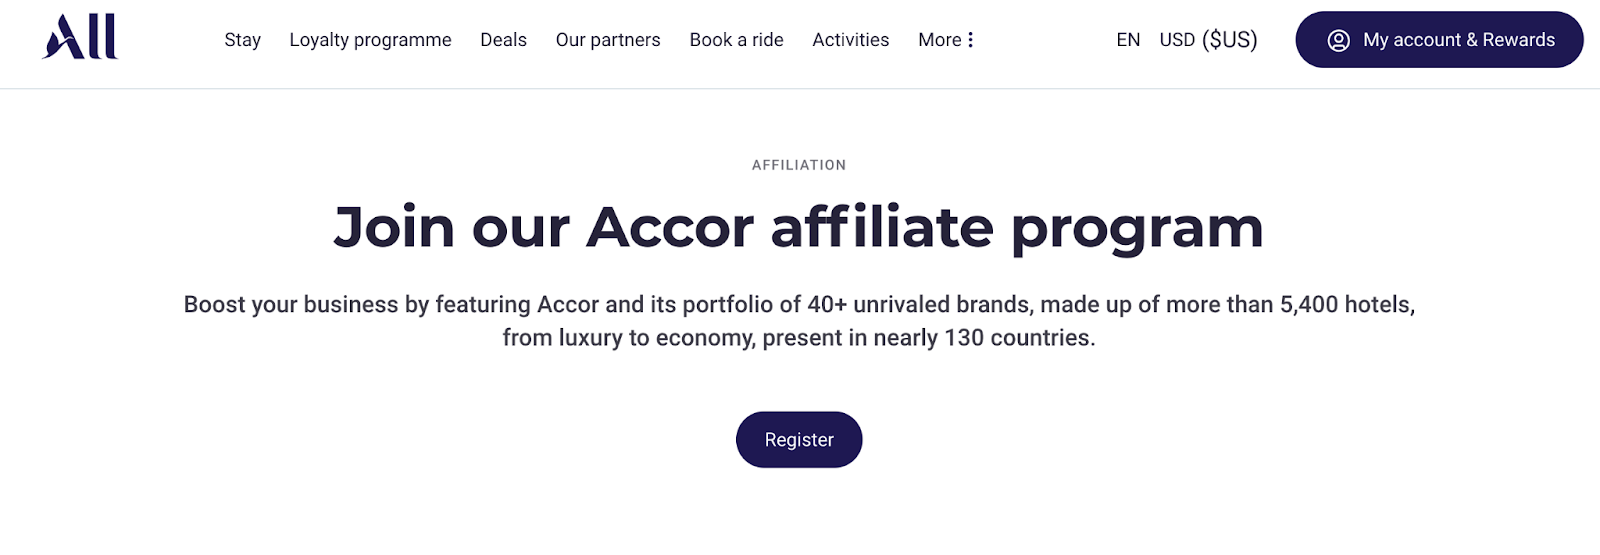 Accor travel affiliate program page on their website